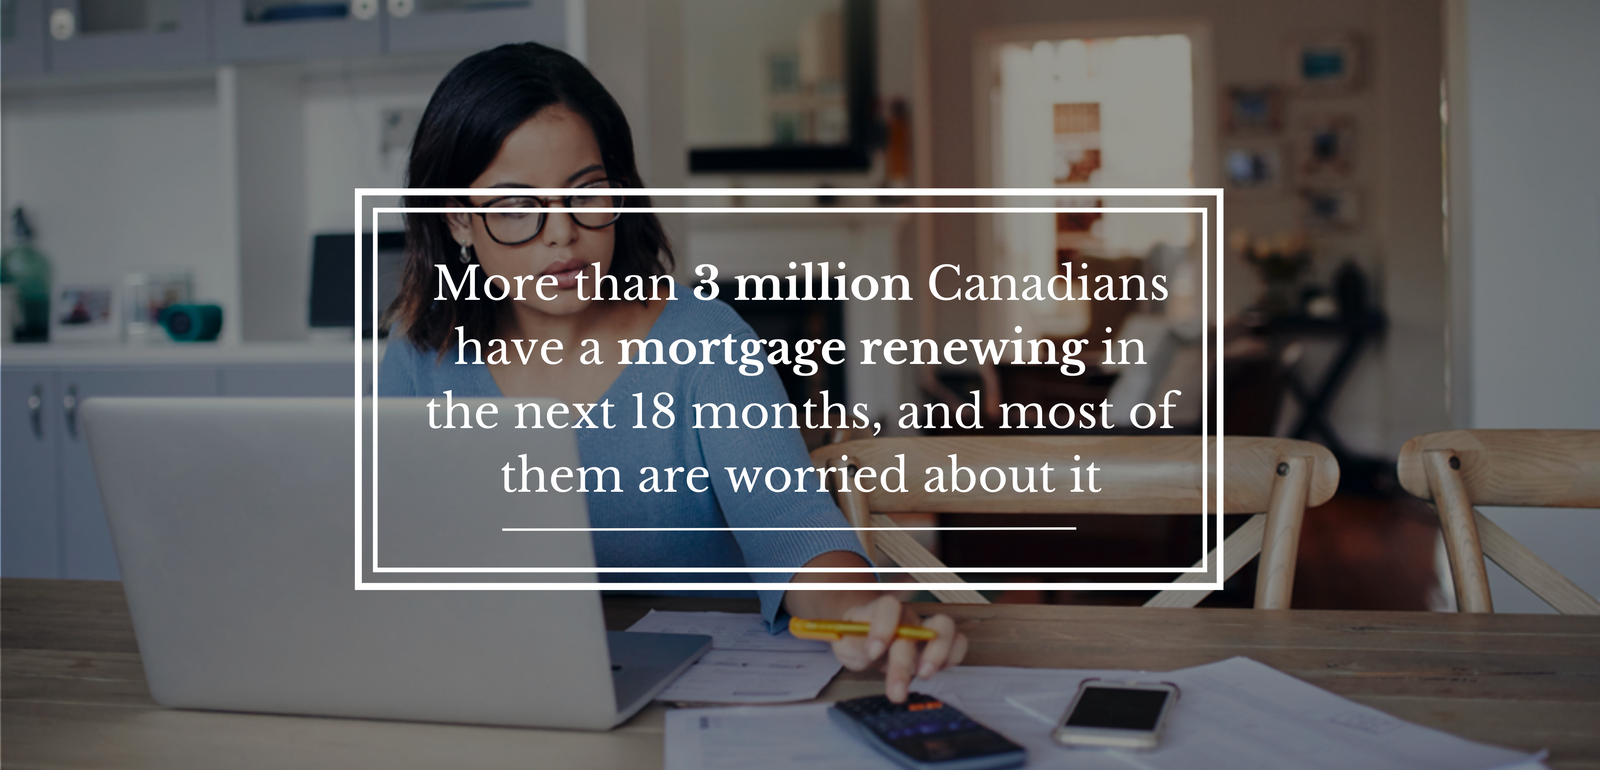 More than 3 million Canadians have a mortgage renewing in the next 18 months, and most of them are worried about it